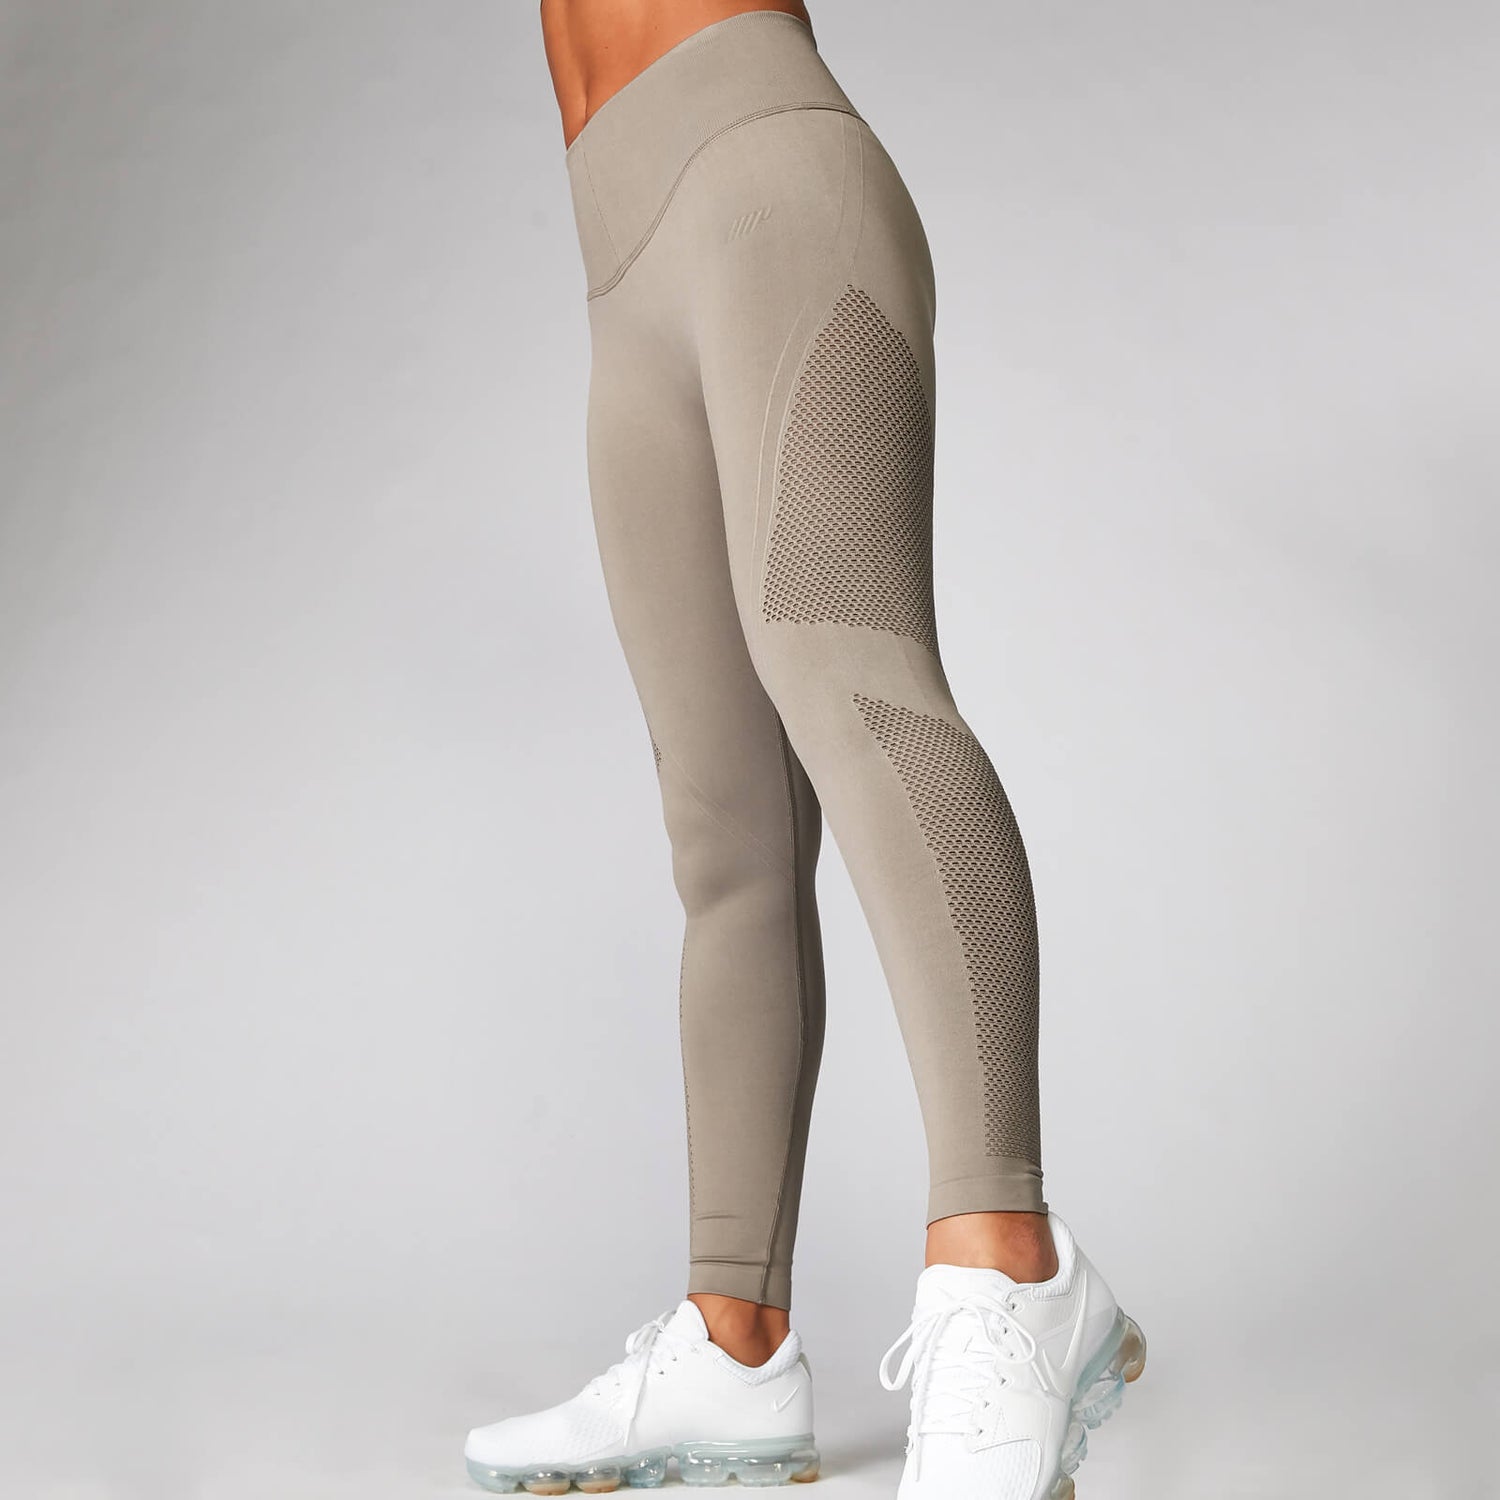 Gym Leggings - Buy Gym Tights & Gym Pants for Women Online (Page 2) | Zivame